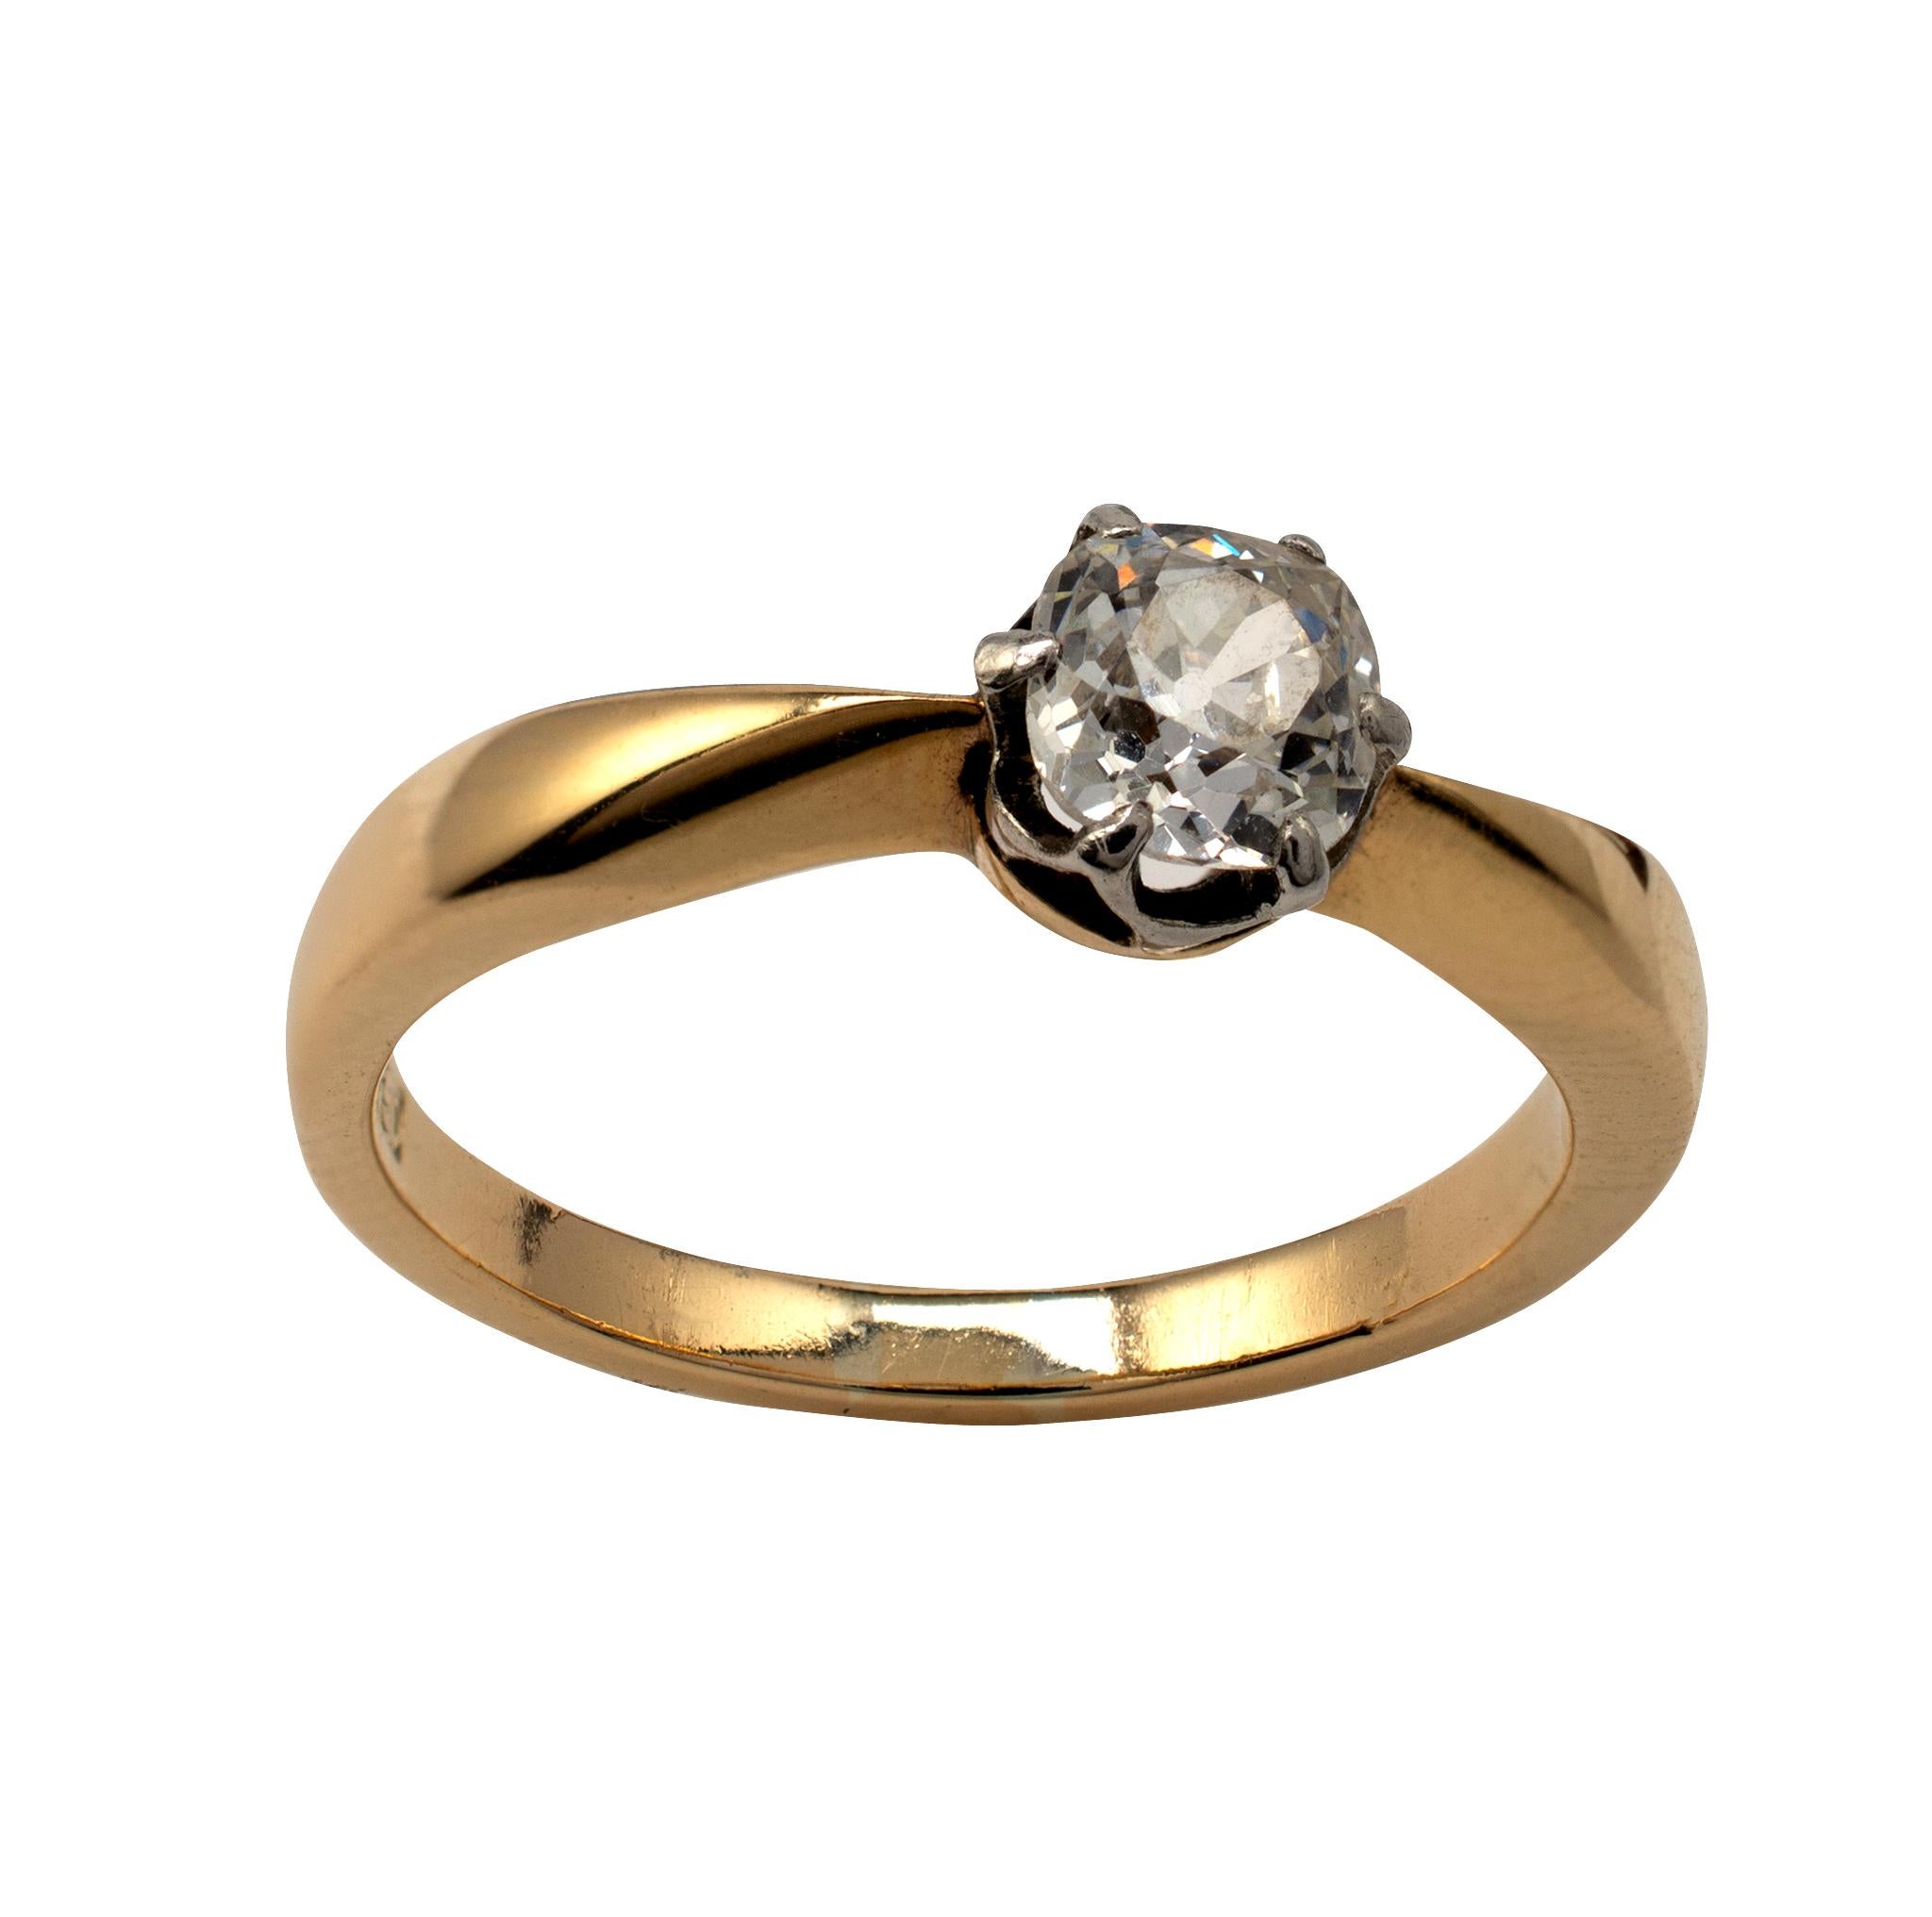 Diamond Solitaire Engagement Ring 0.50 Carat Old Cut, 18 Karat Gold, circa 1970s For Sale 8